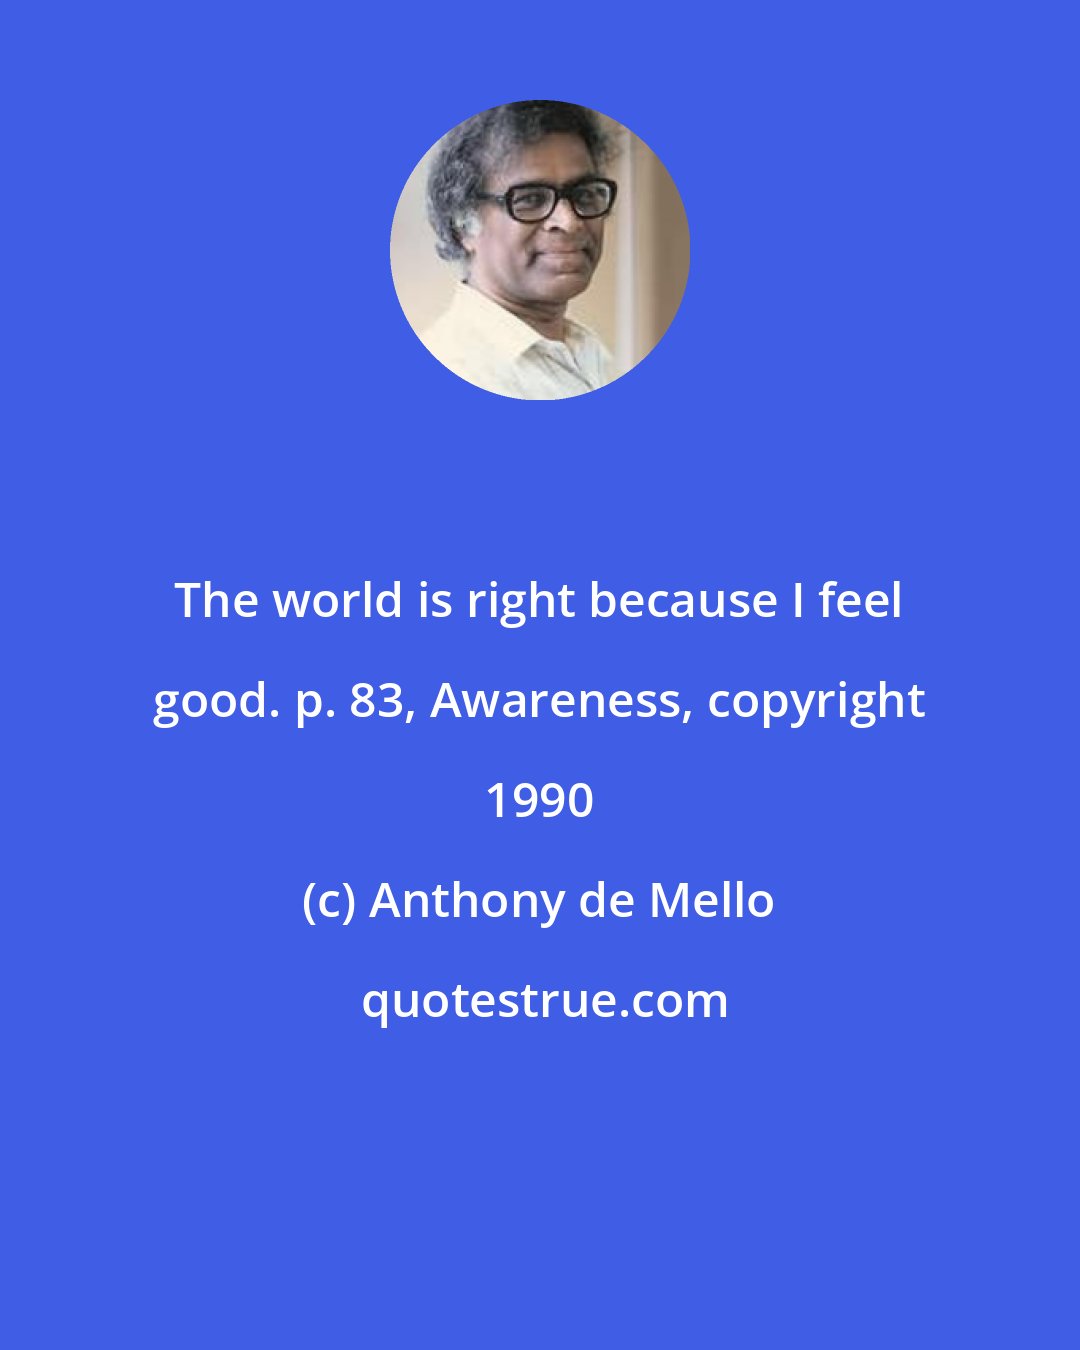 Anthony de Mello: The world is right because I feel good. p. 83, Awareness, copyright 1990